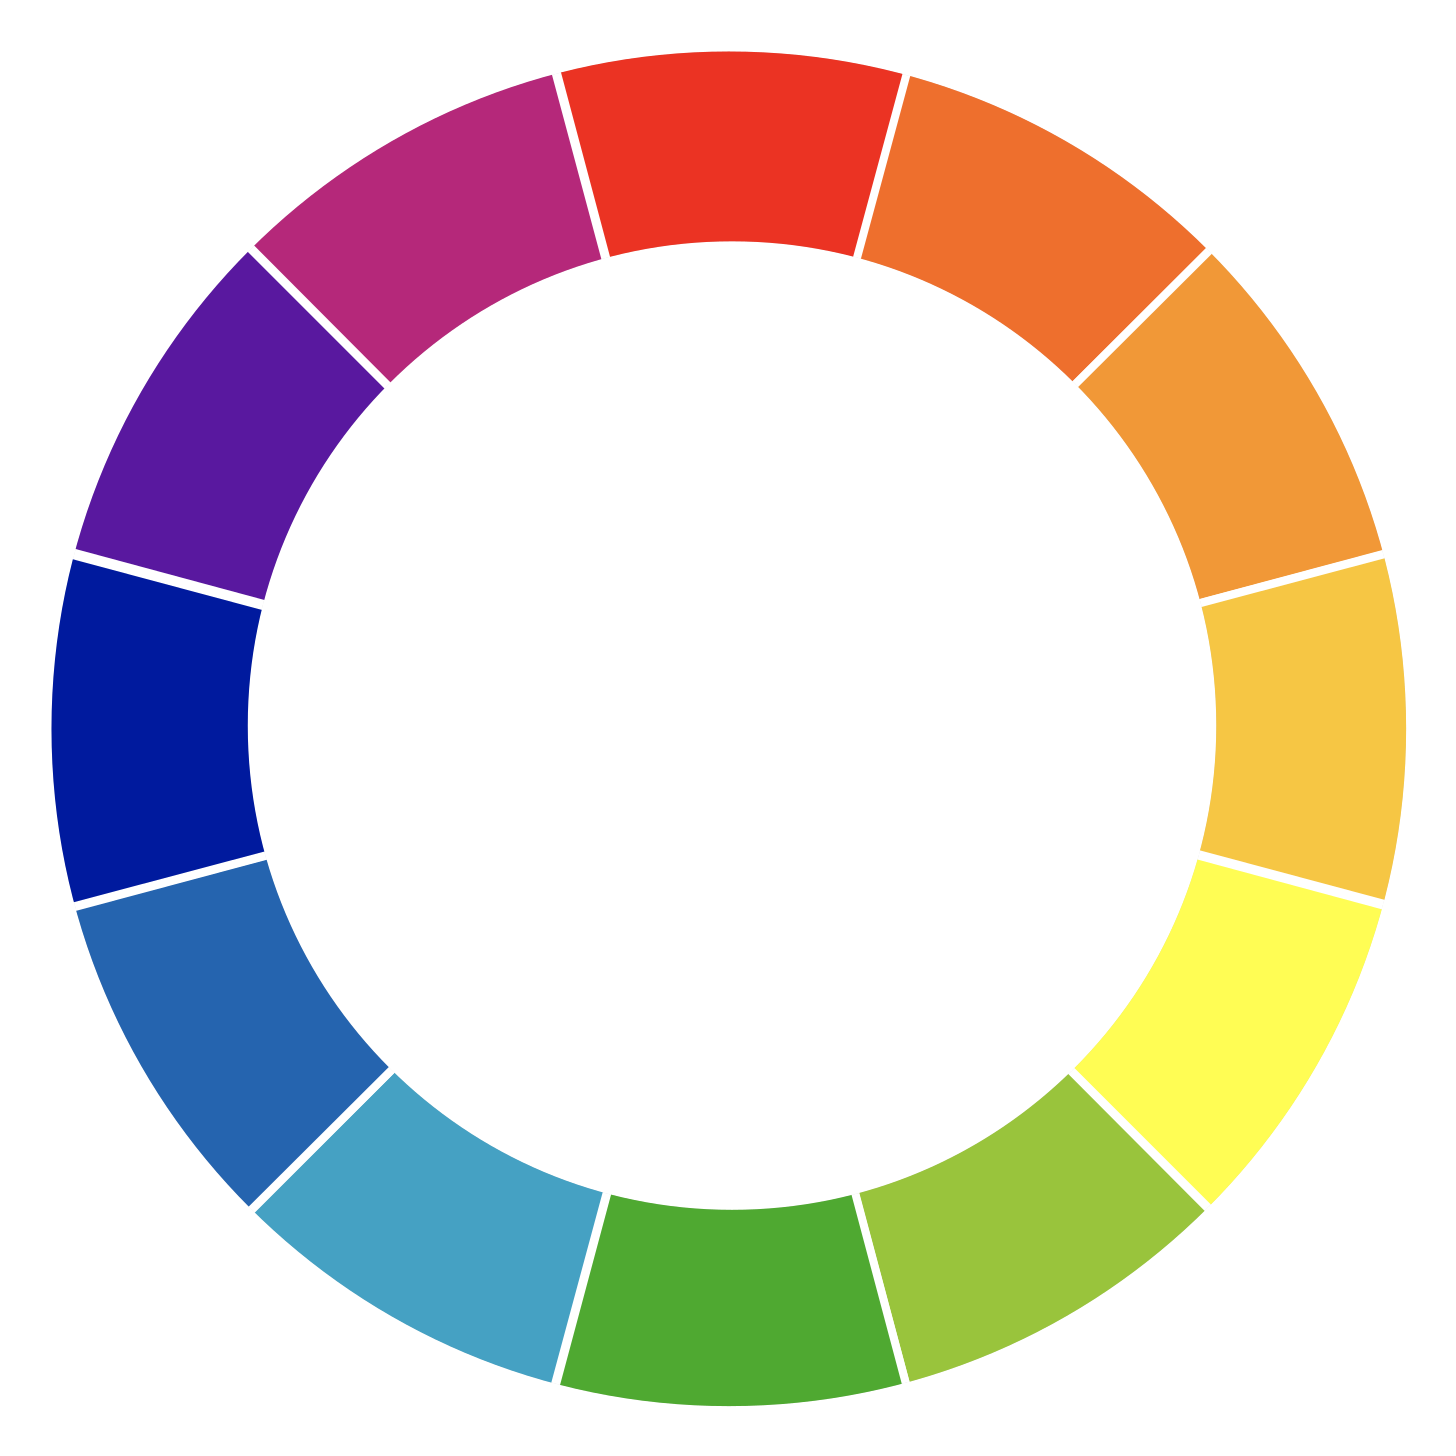 A color wheel that is represented by two circles, the smaller one is enclosed by a larger circle. The area between the circles is fenced off into sections, each displaying the colors of the rainbow.